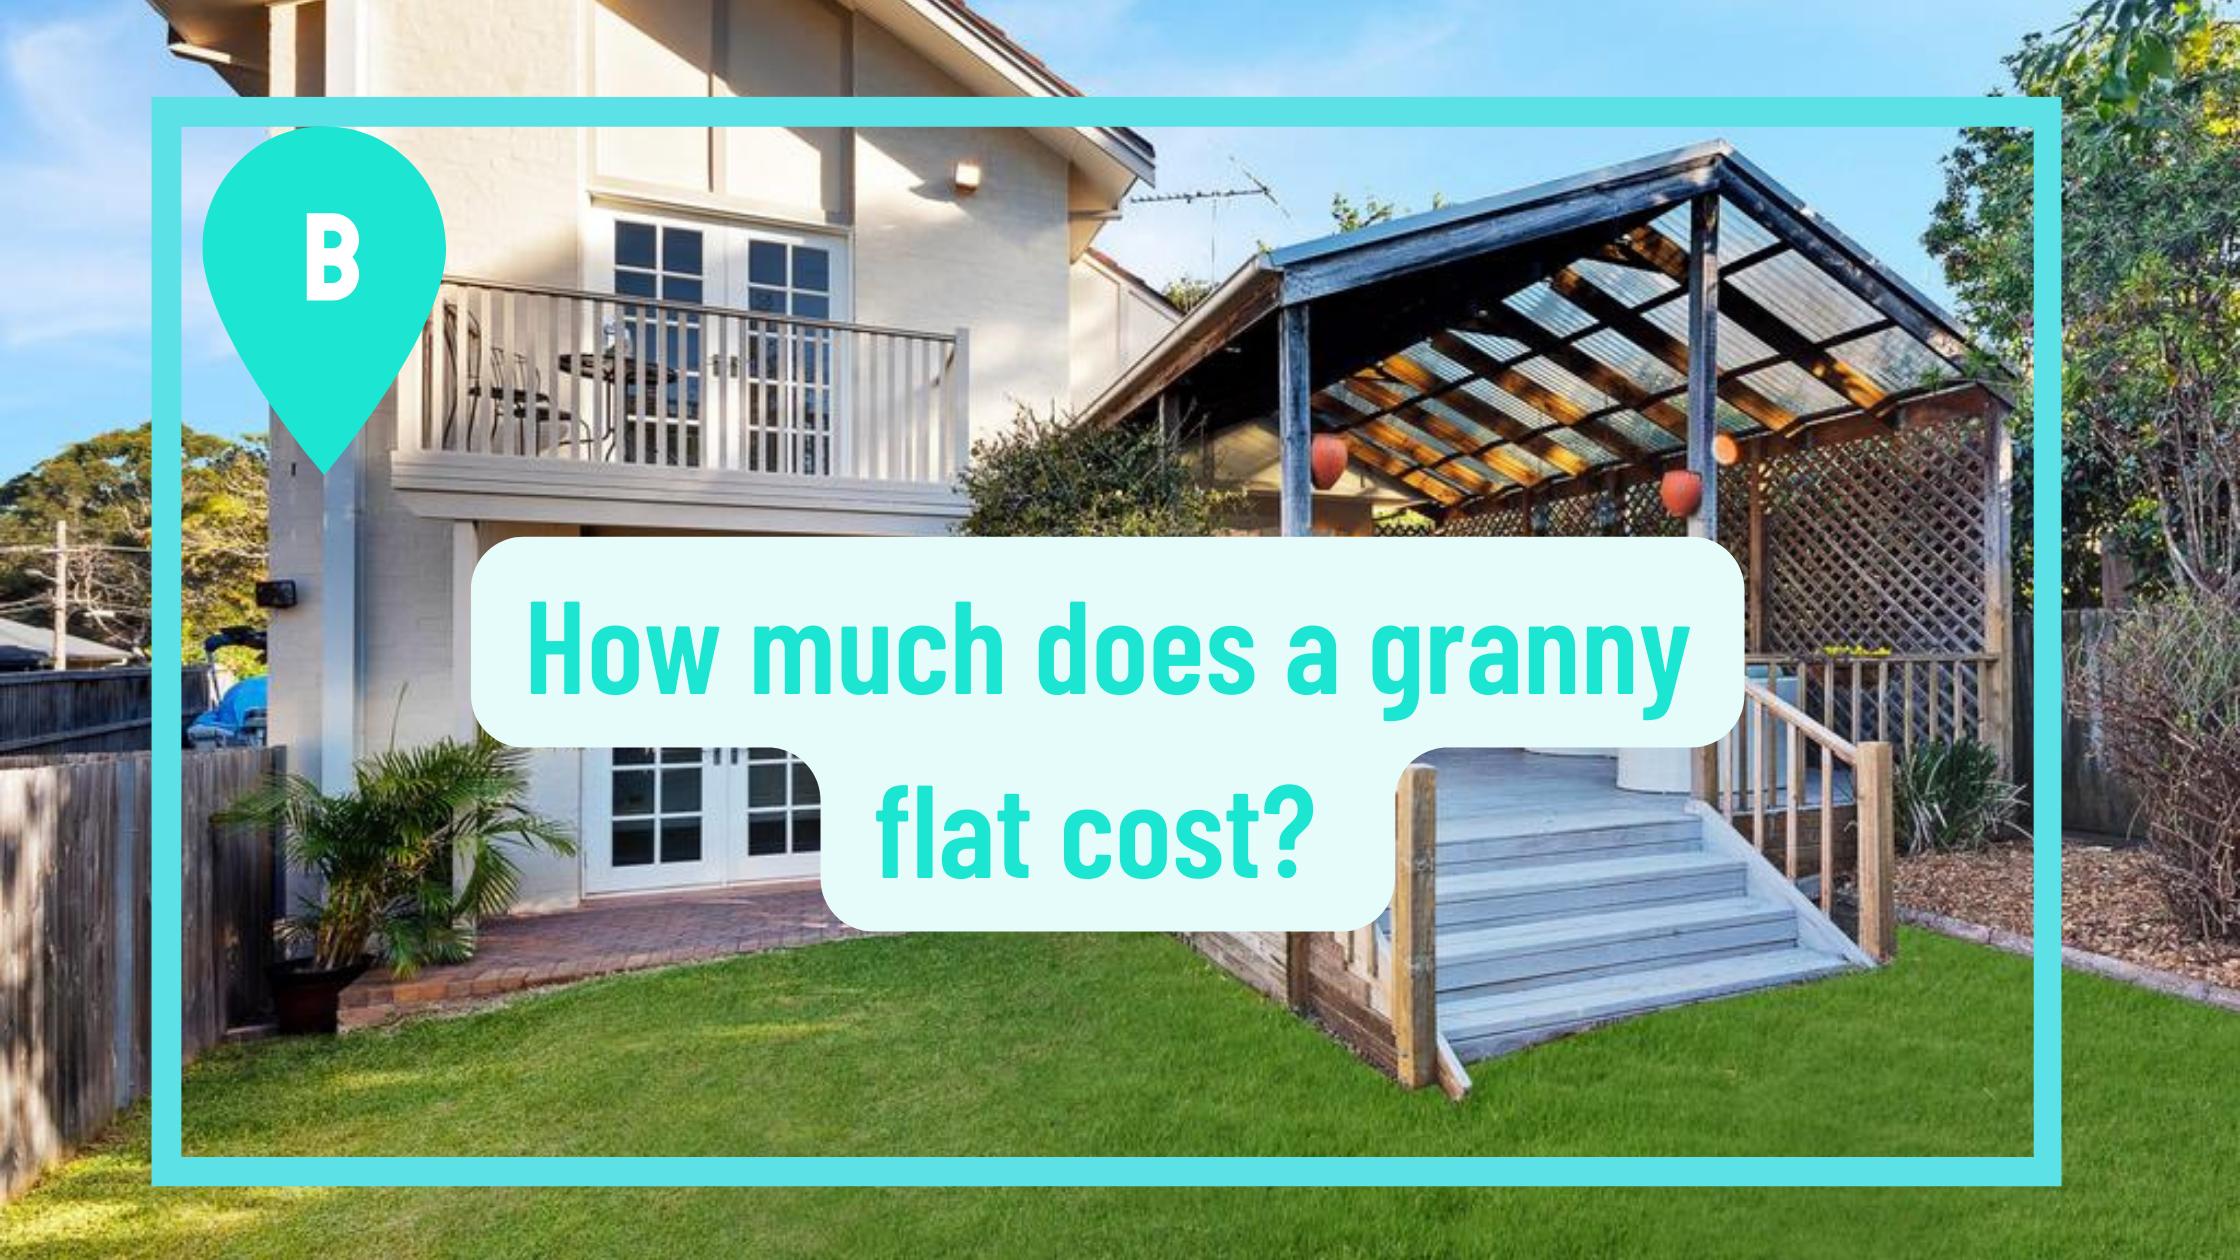 HOW MUCH IMPACT DOES A GRANNY FLAT HAVE ON PROPERTY VALUE?